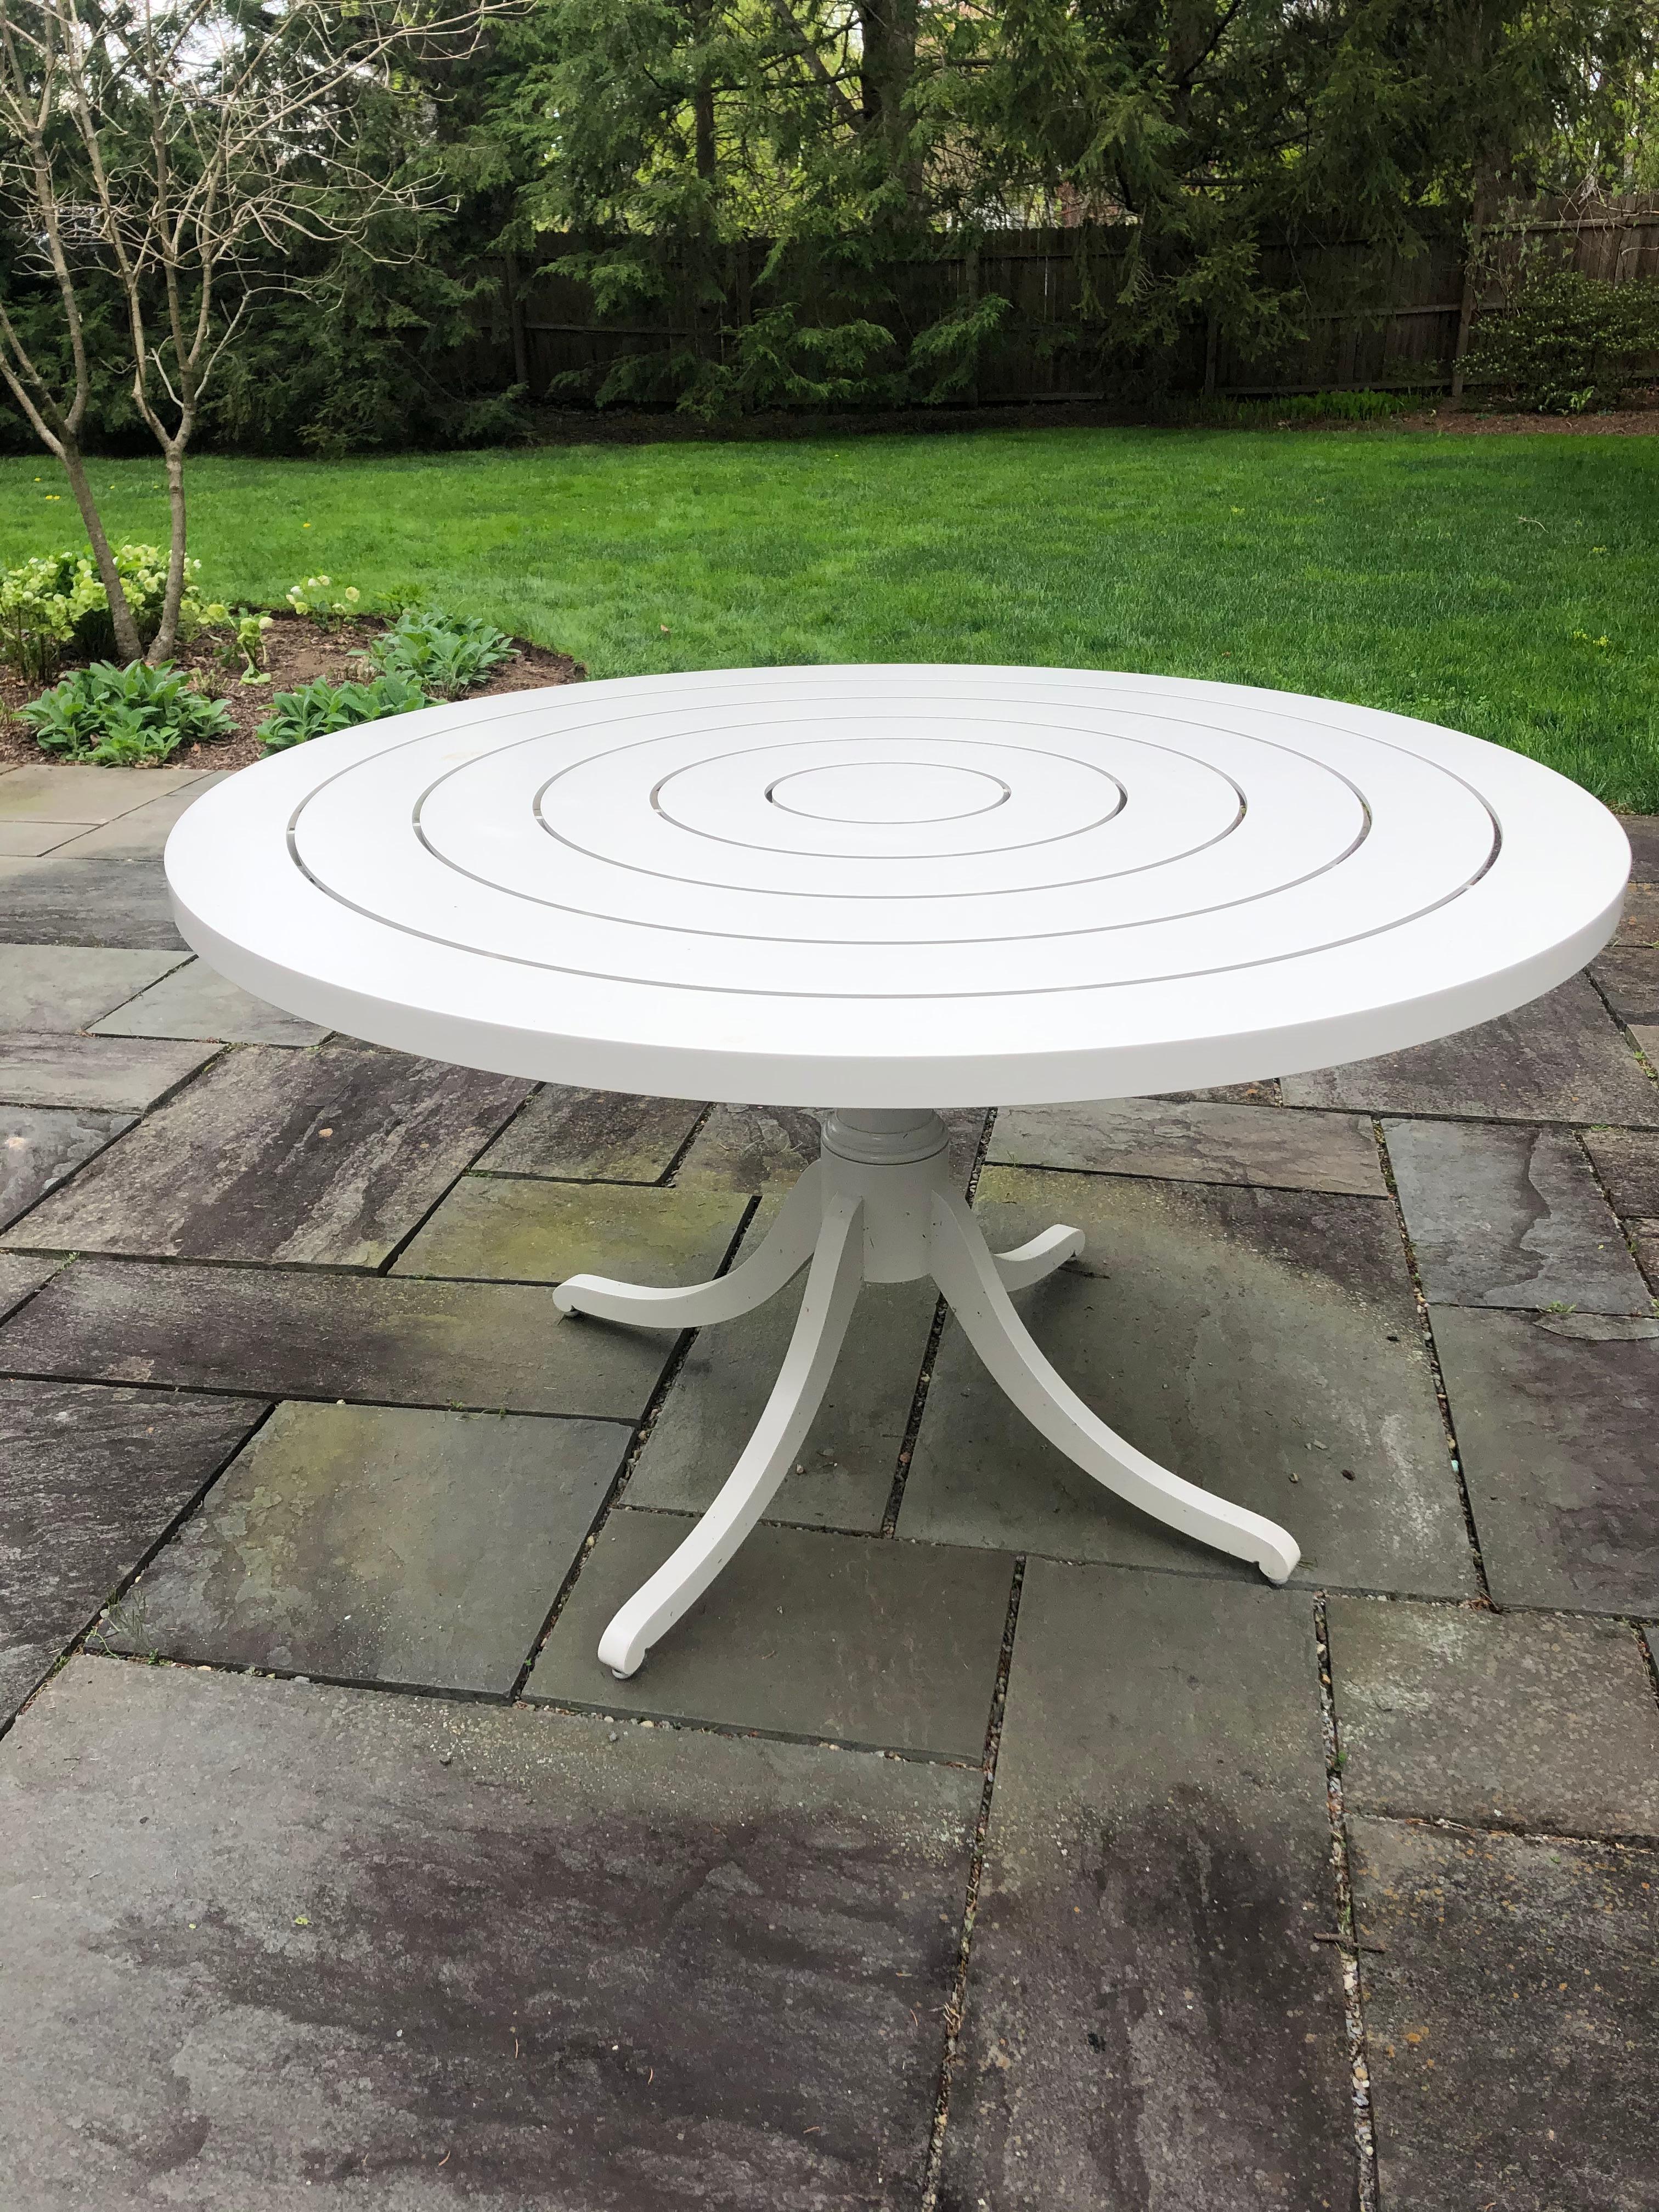 Chic round outdoor precision crafted heavy white aluminum dining table bought 4 years ago for about $11K from McKinnon & Harris, the internationally recognized outdoor furniture brand revered for exceptional hand craftsmanship and high performance